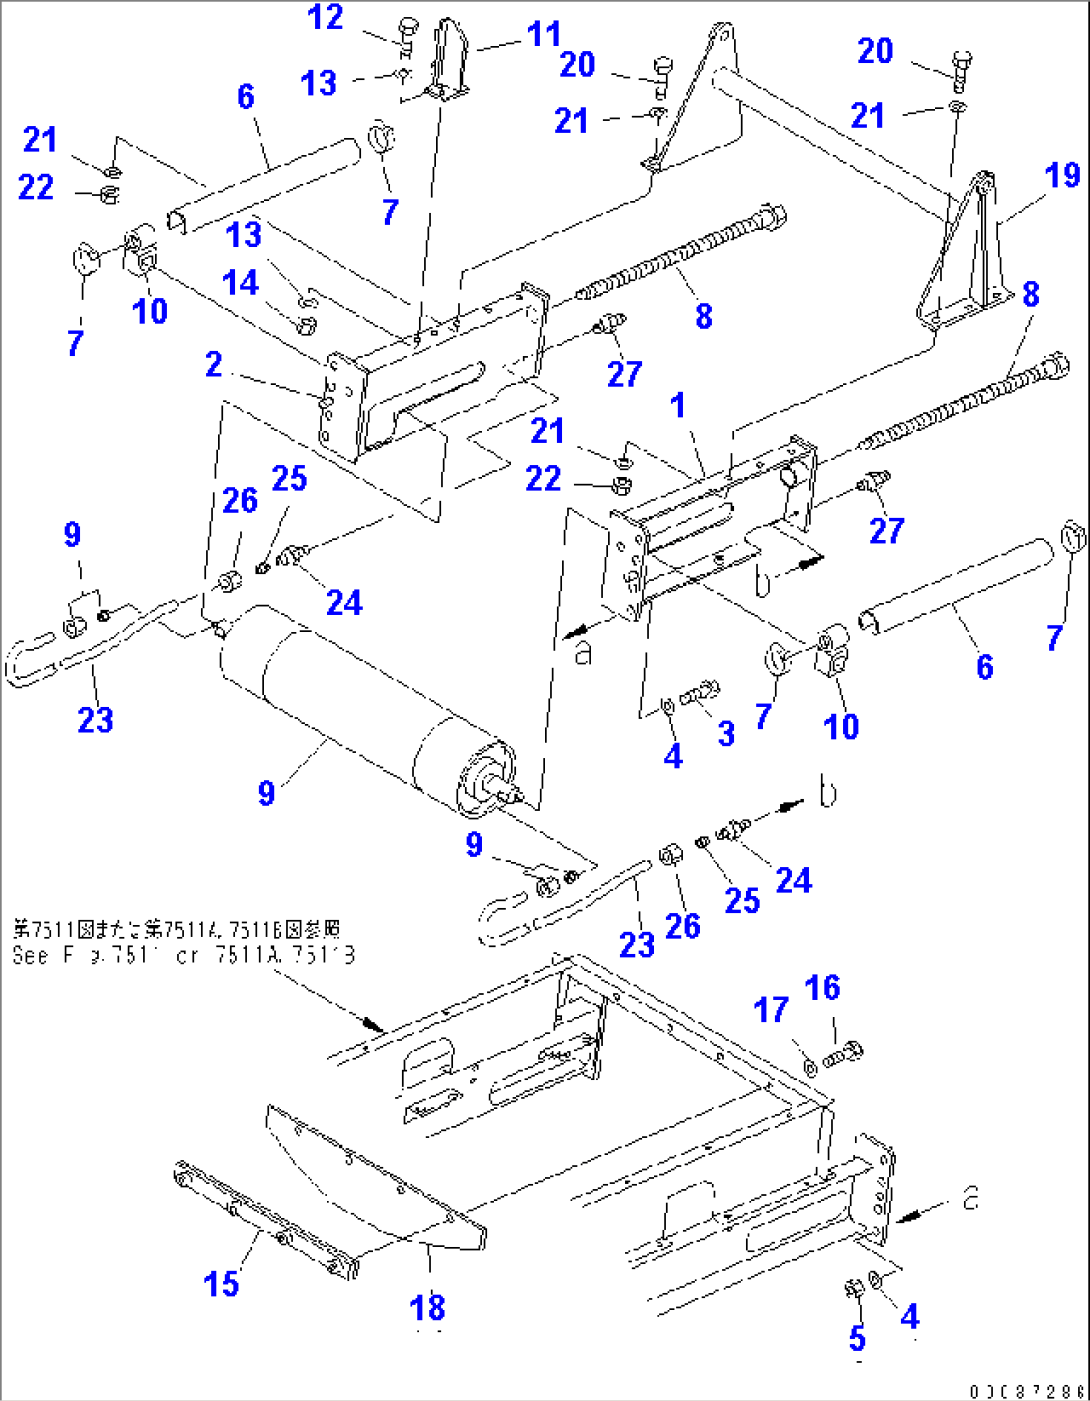 1ST CONVEYOR (6/8) (TAIL FRAME AND PULLEY)(#1001-1115)